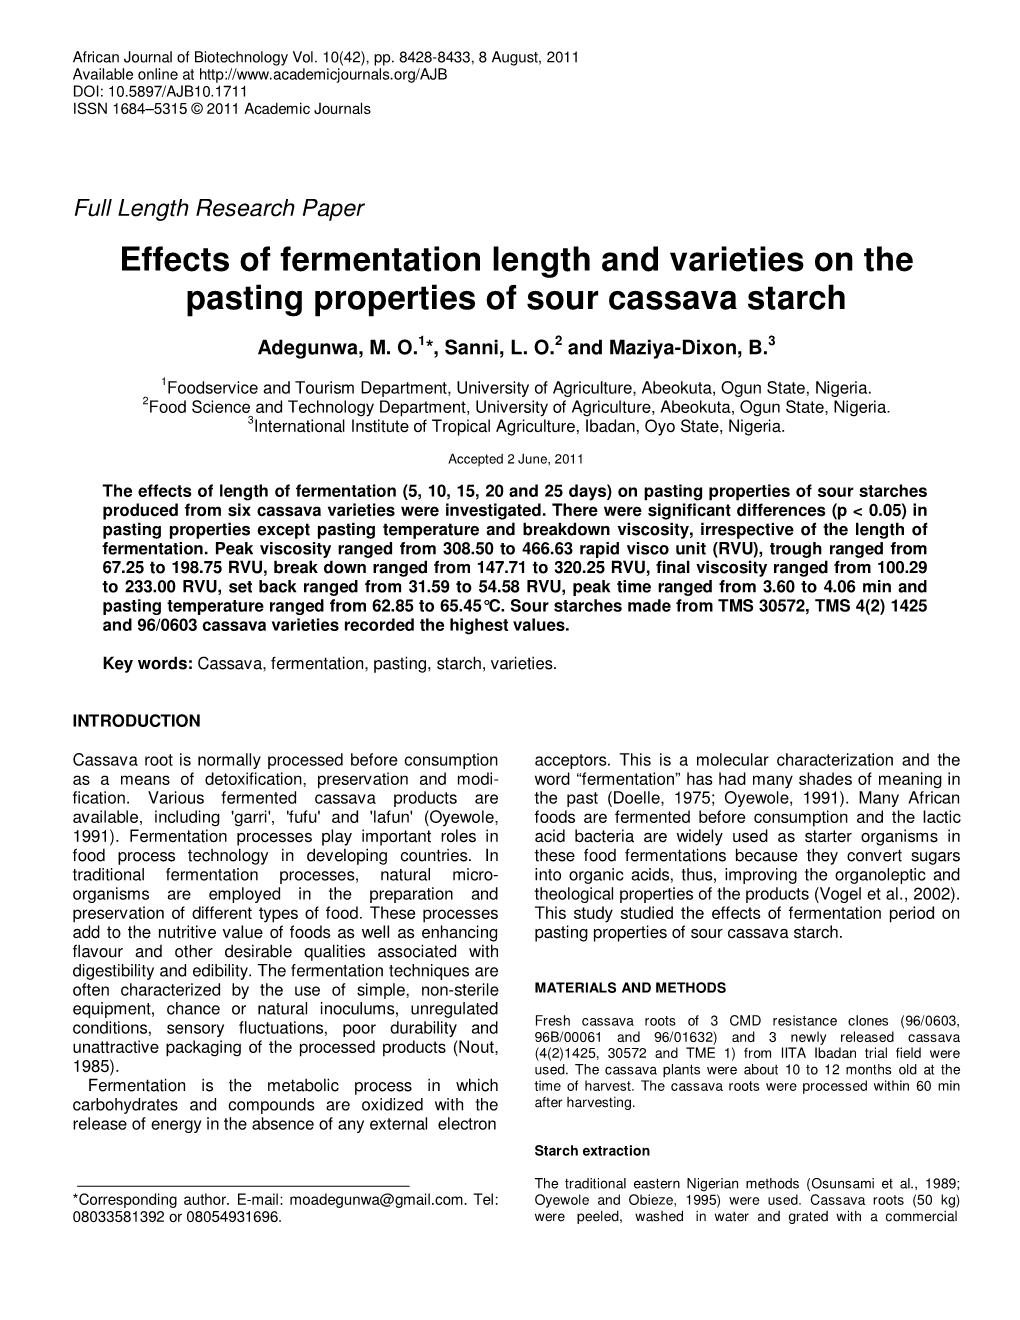 Effects of Fermentation Length and Varieties on the Pasting Properties of Sour Cassava Starch